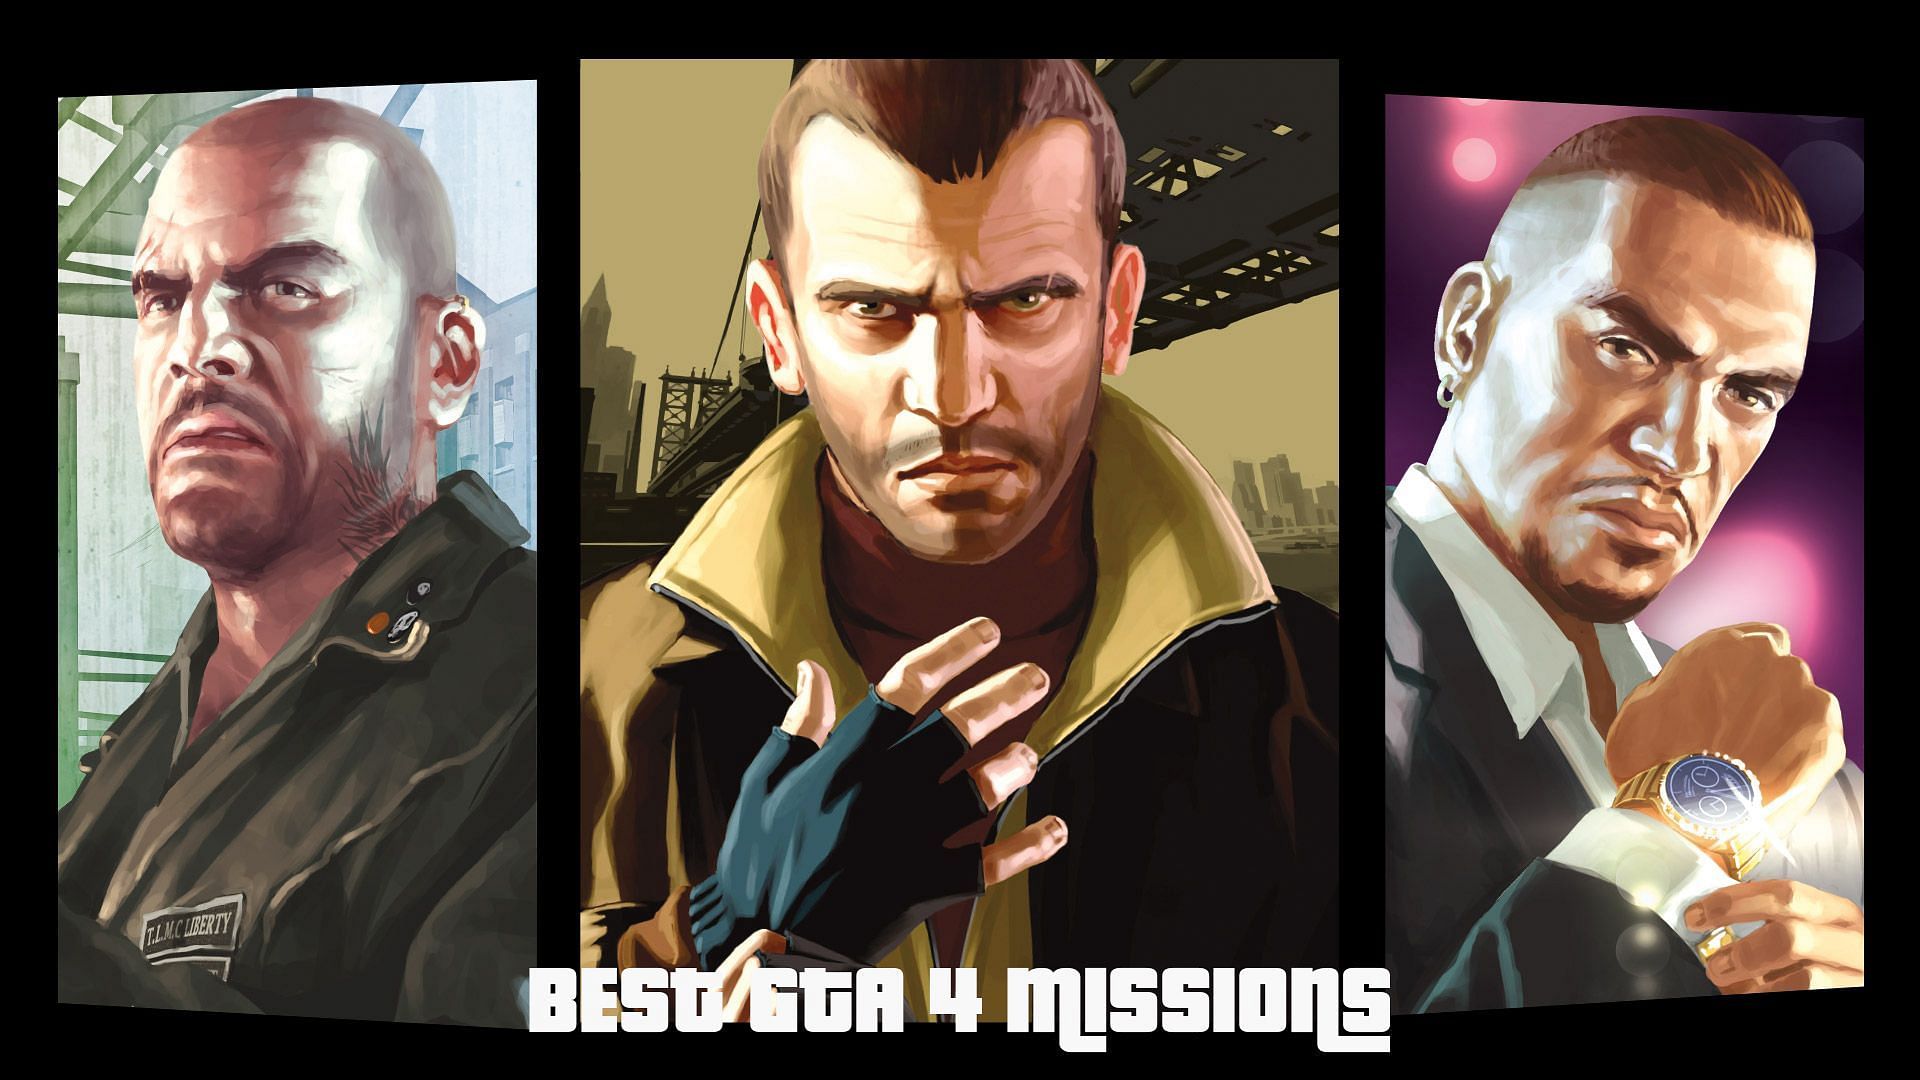 GTA 4 may be old, but OG gamers still go back to Niko from time to time (Image via Sportskeeda)